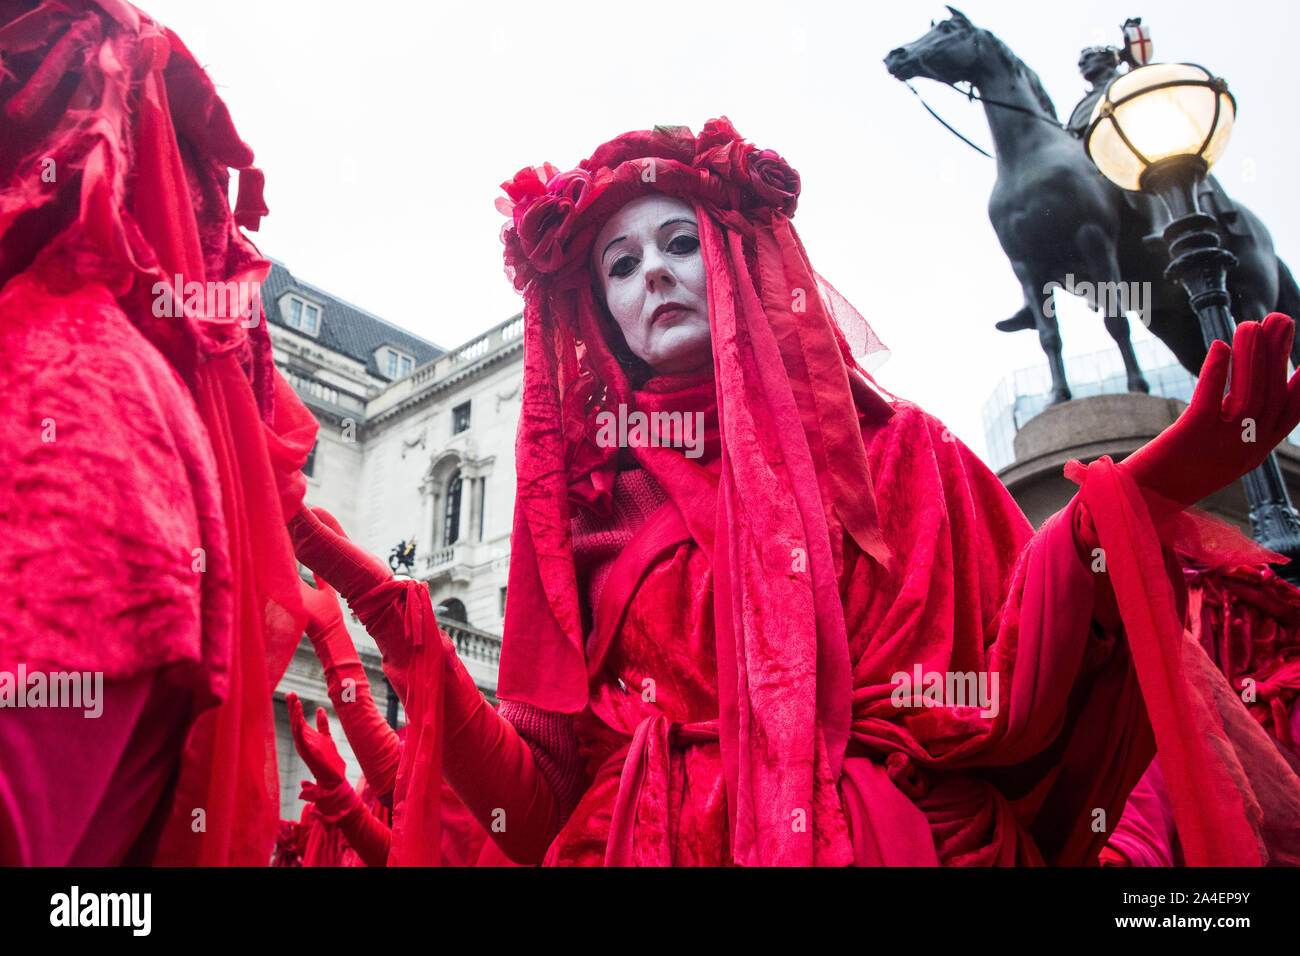 London, UK. 14 October, 2019. The Red Brigade join fellow climate activists from Extinction Rebellion staging theatrical mock trials, of the UK’s financial sector for the crime of ecocide and of the Government for ‘criminal negligence’ in having permitted it, in front of the Bank of England. Roads were blocked around Bank on the eighth day of International Rebellion protests across London. Credit: Mark Kerrison/Alamy Live News Stock Photo